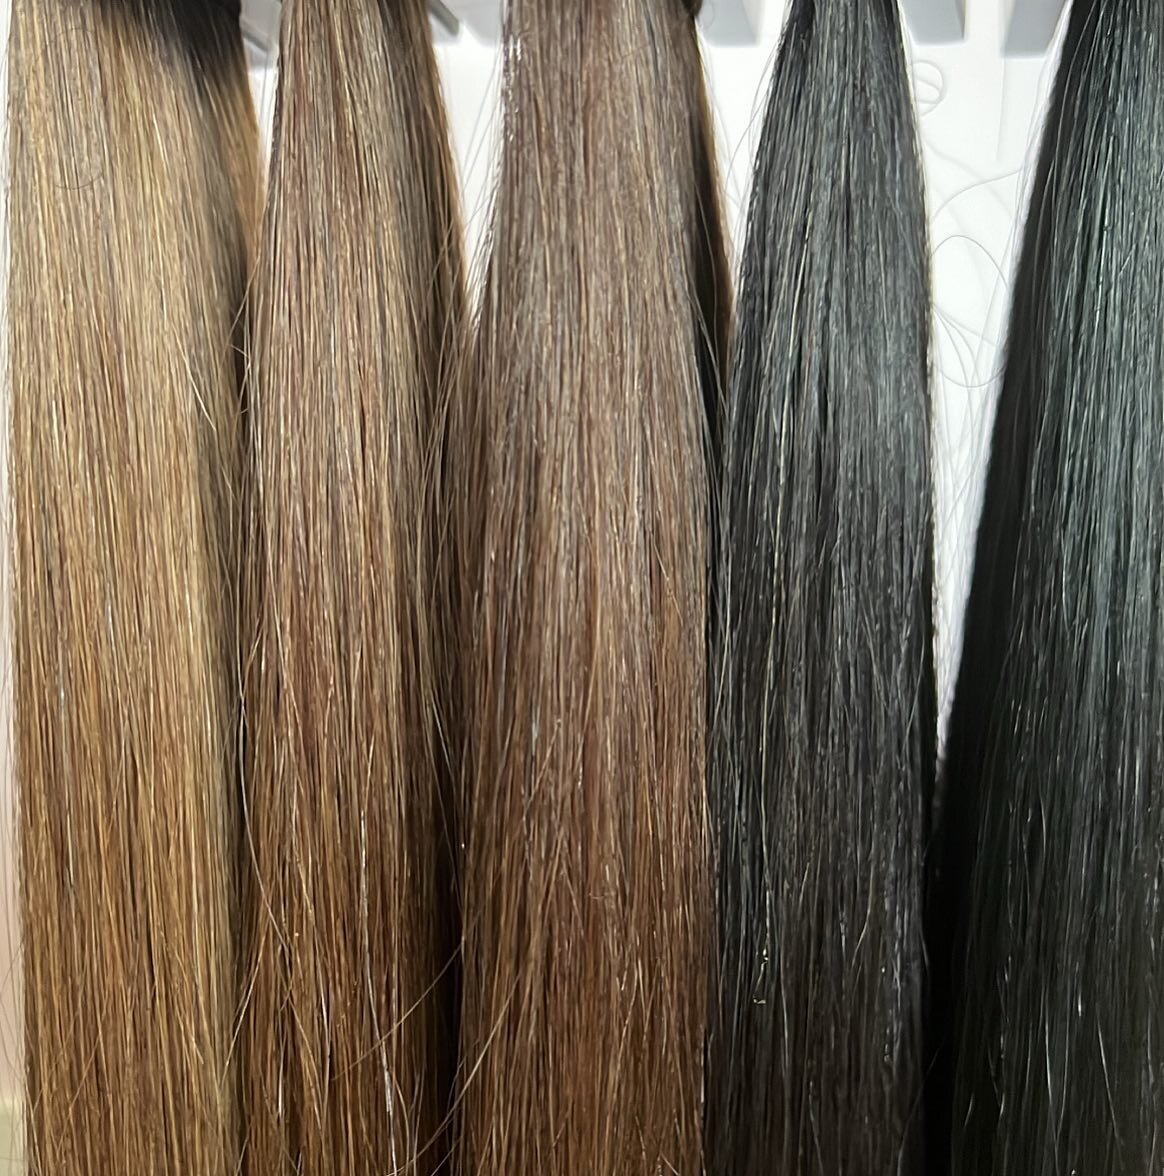 Our browns 🥰

#hairextensions #hairextensionspecialist #pearlmane #pearlmanehair #pearlmanehairextensions #longhair #weft #weftextensions #flatweft #flatweftextensions #invisablehairextensions #undetectablehairextensions #blondehair #brownhair #blac